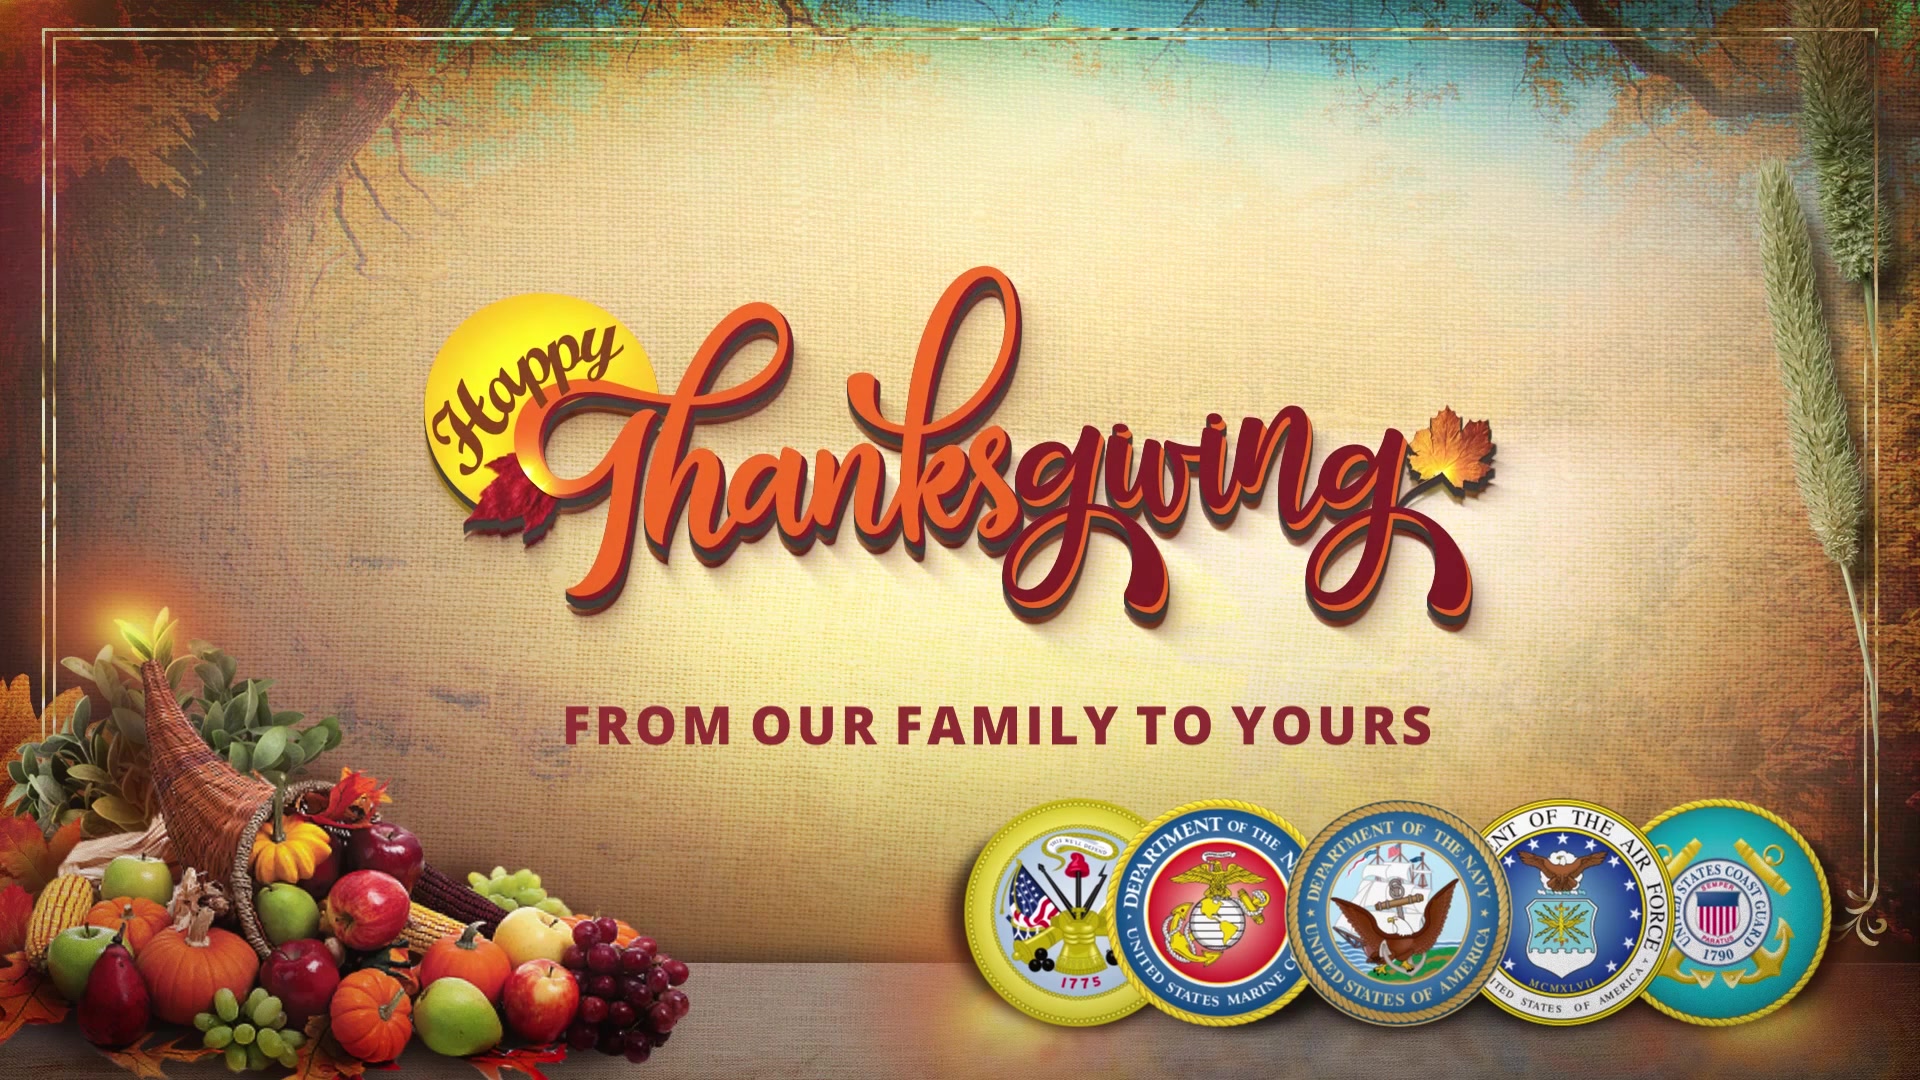 Soldiers from around the world take a moment to wish their families and friends a Happy Thanksgiving.